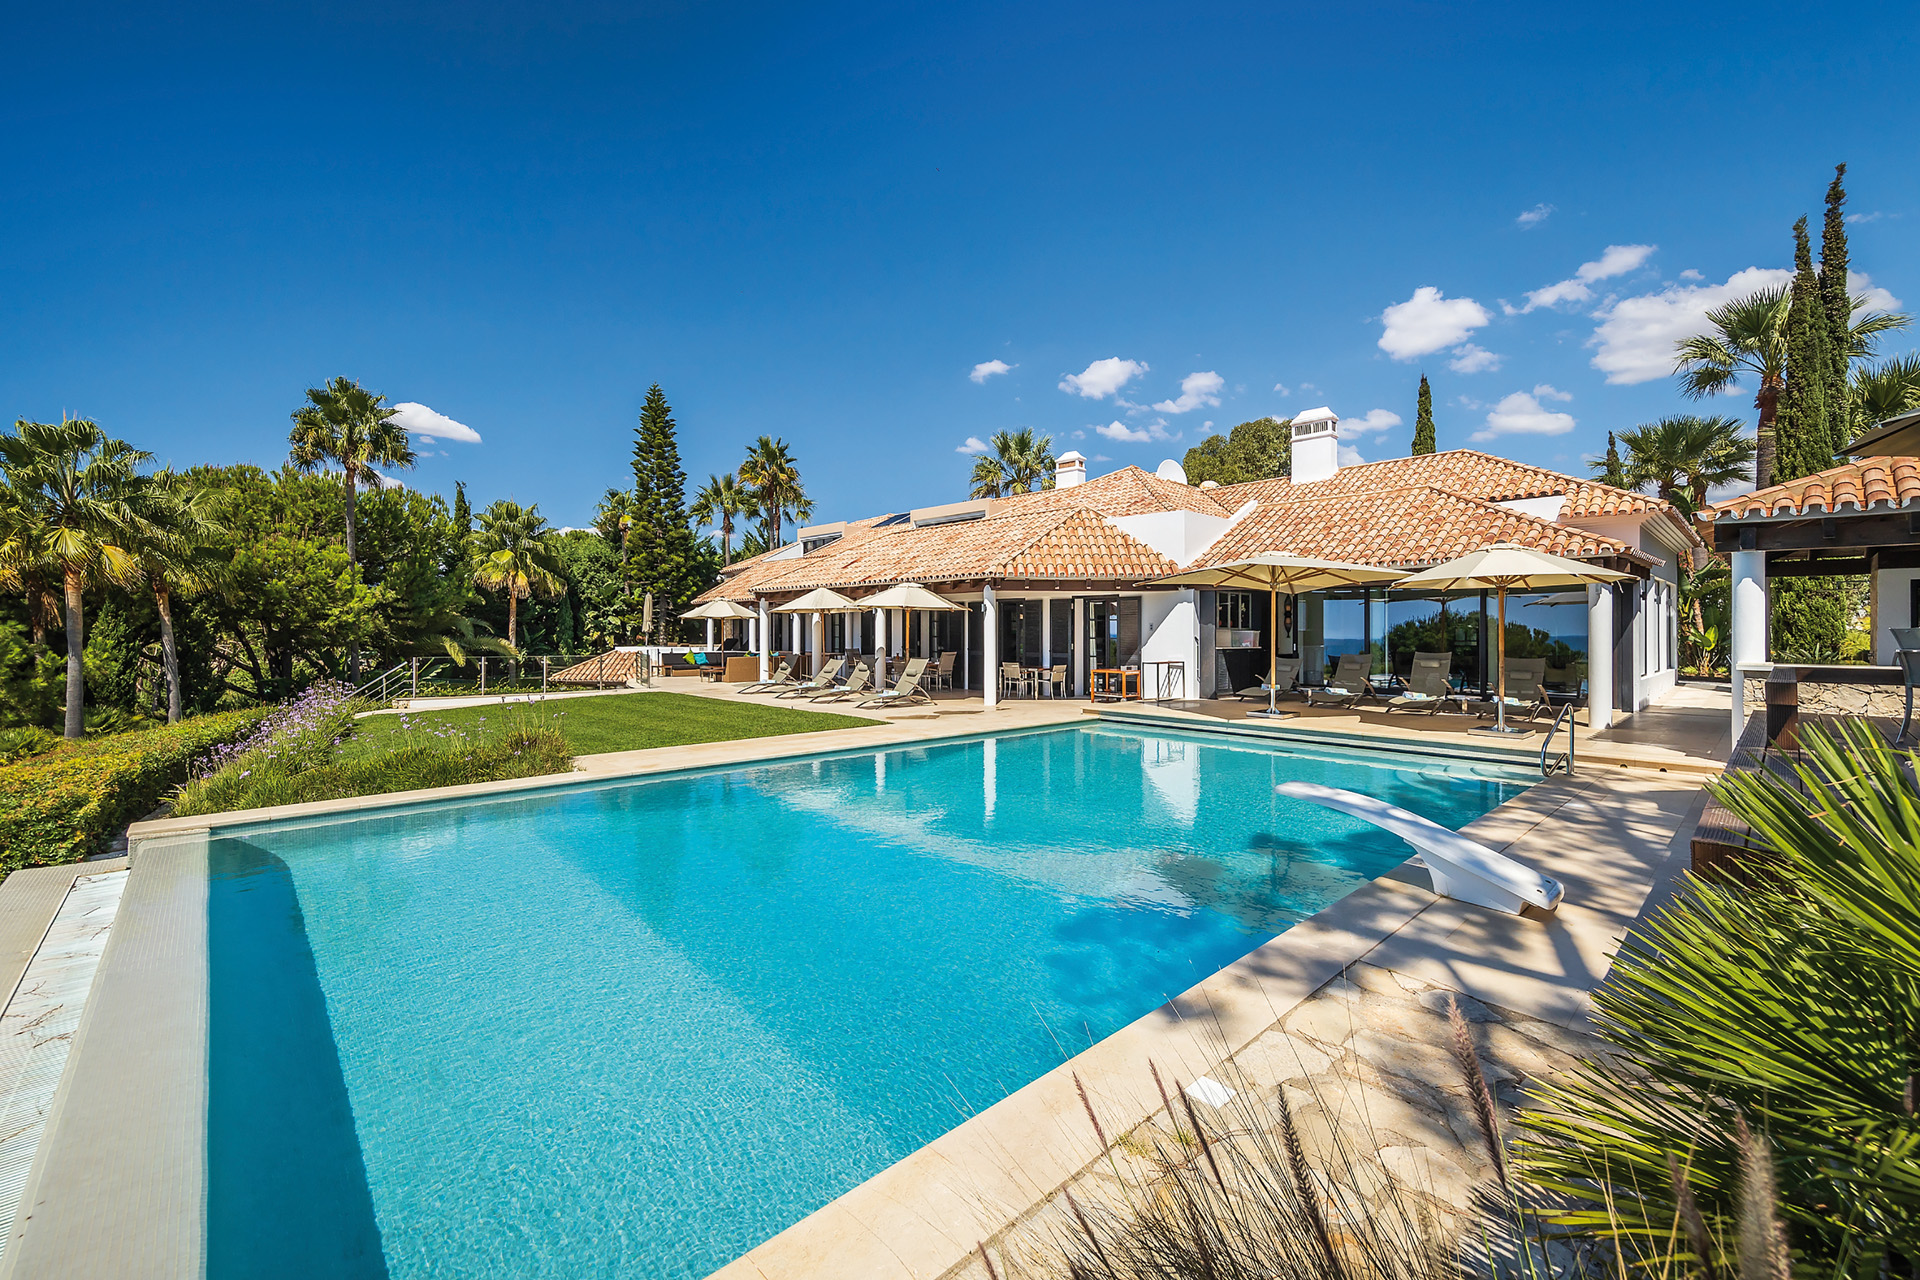 A Portugese villa with bright blue pool